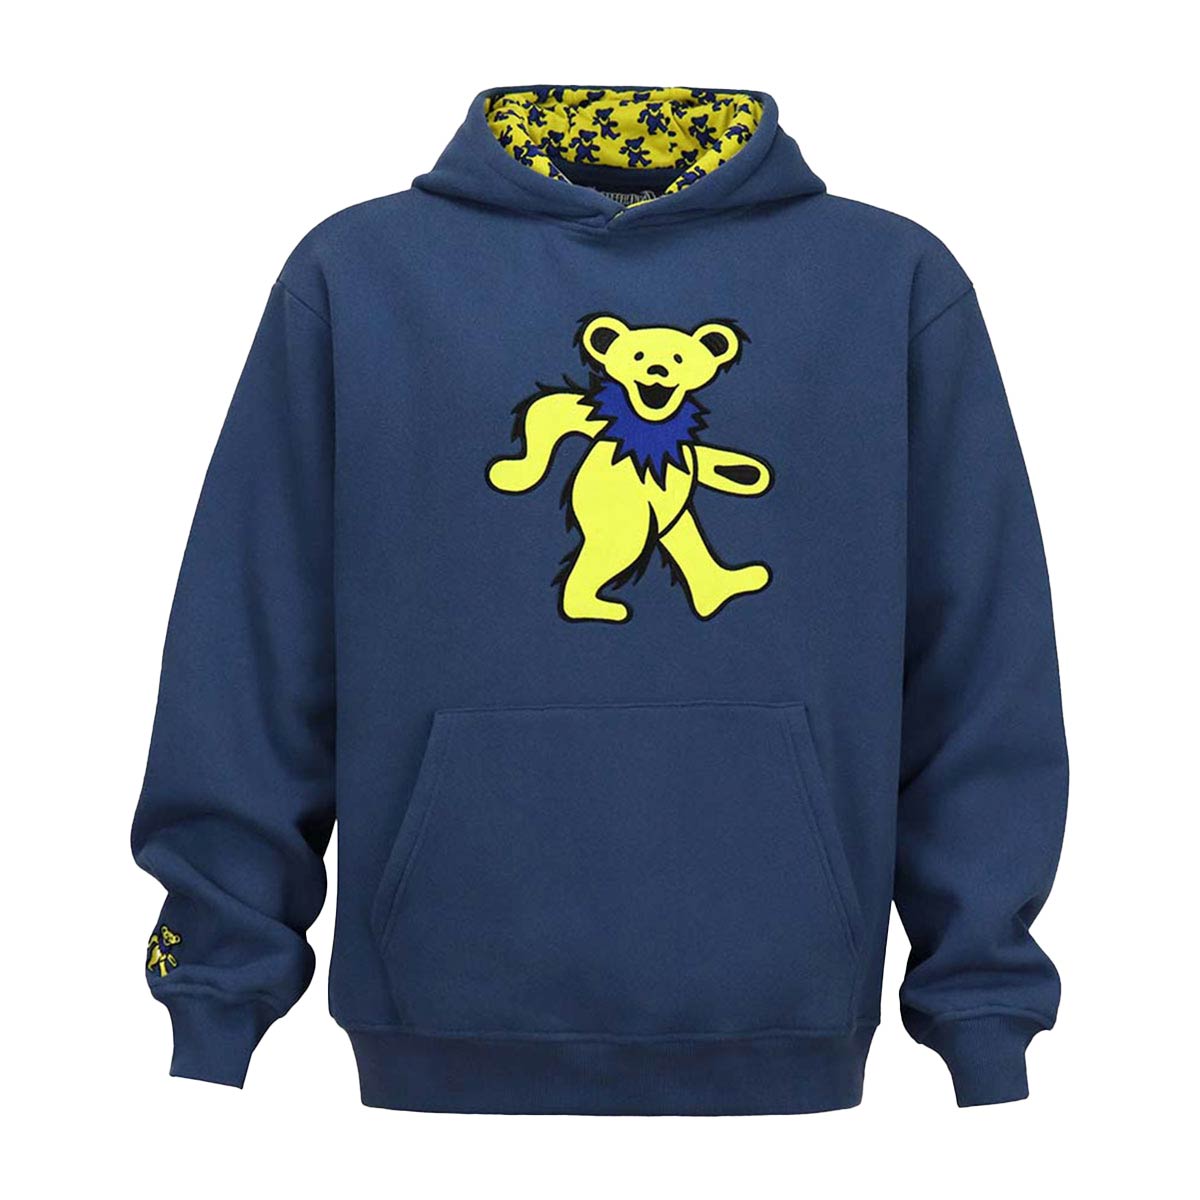 Grateful Dead Hoodie with Yellow Bear in Navy